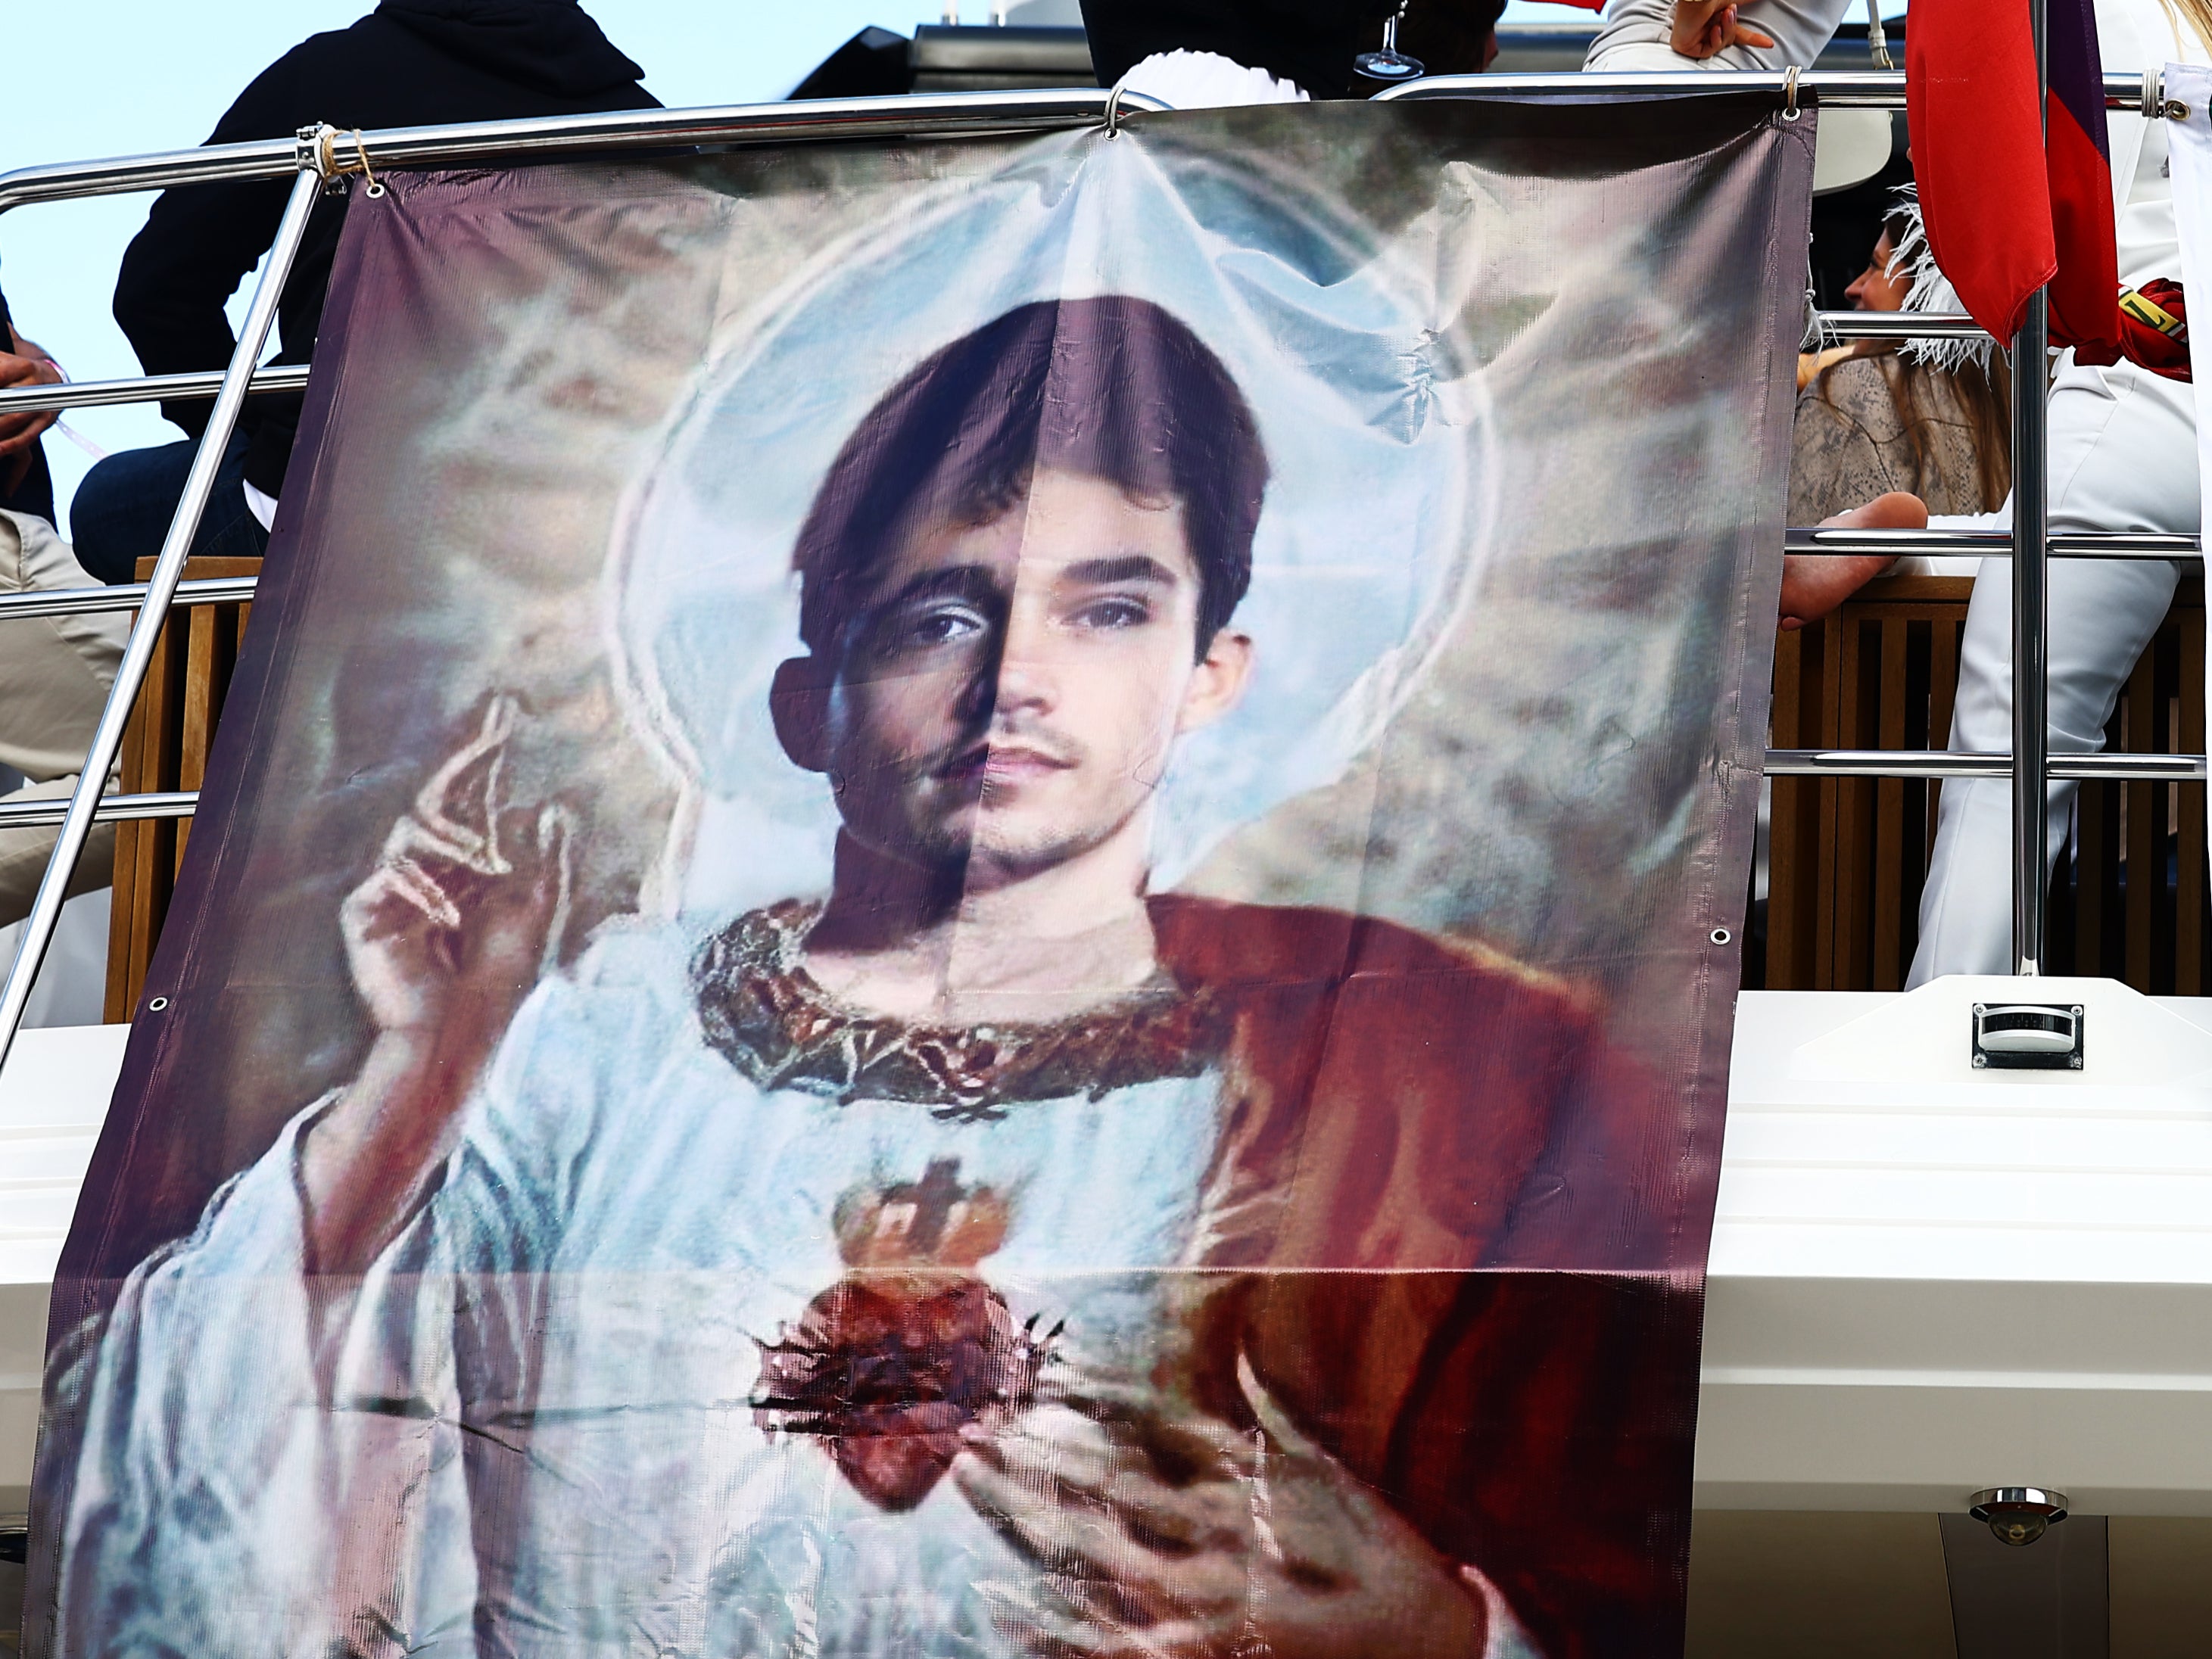 A flag of Charles Leclerc shows his fandom in Monaco